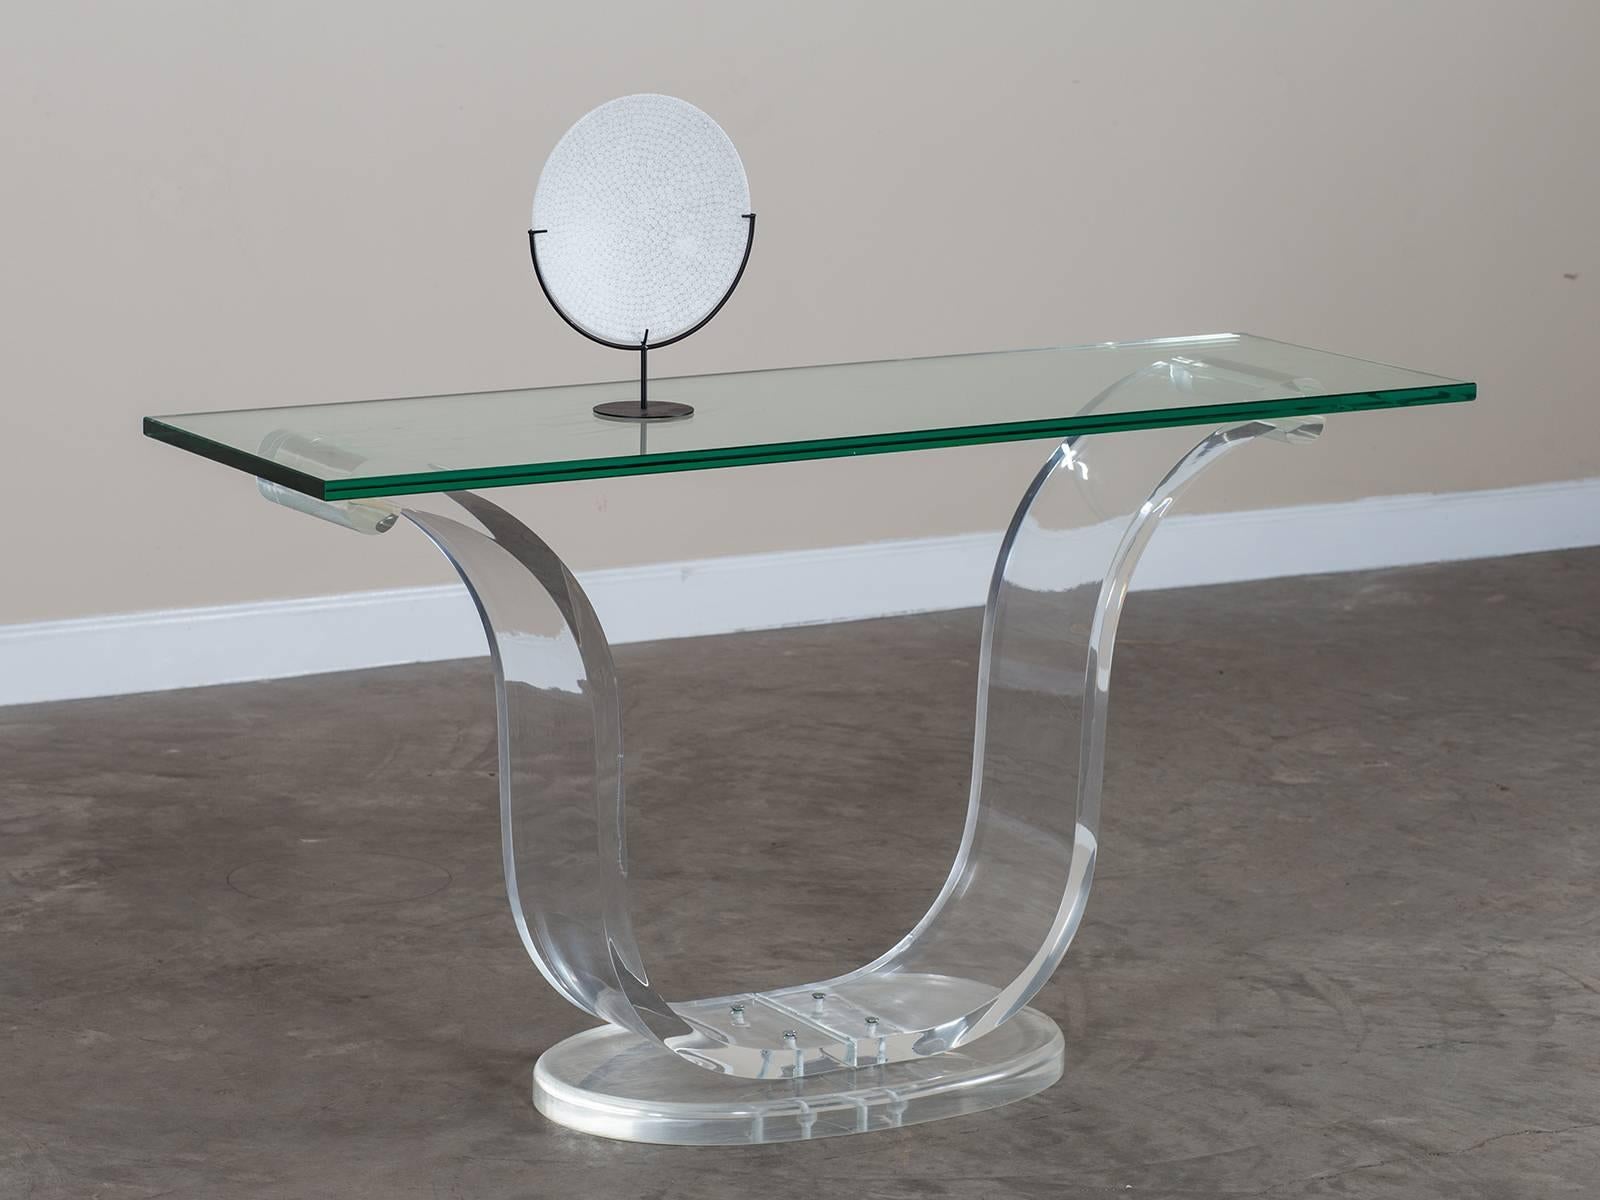 Receive our new selections direct from 1stdibs by email each week. Please click Follow Dealer below and see them first!

The elegant arch of the curve made by the Lucite base of this vintage French console table circa 1970 is completely